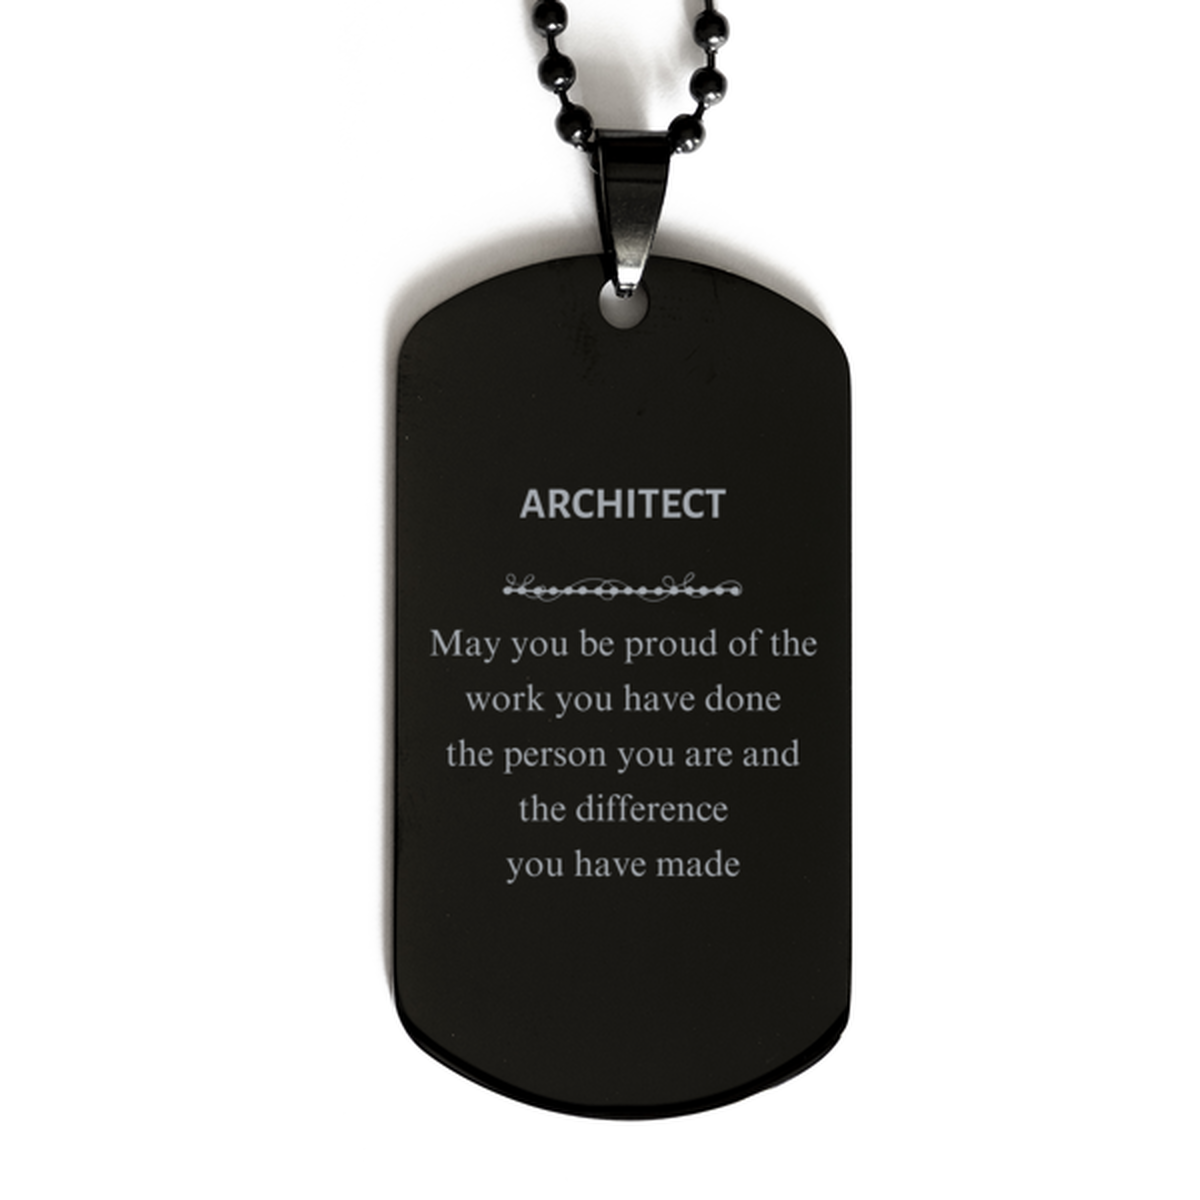 Architect May you be proud of the work you have done, Retirement Architect Black Dog Tag for Colleague Appreciation Gifts Amazing for Architect